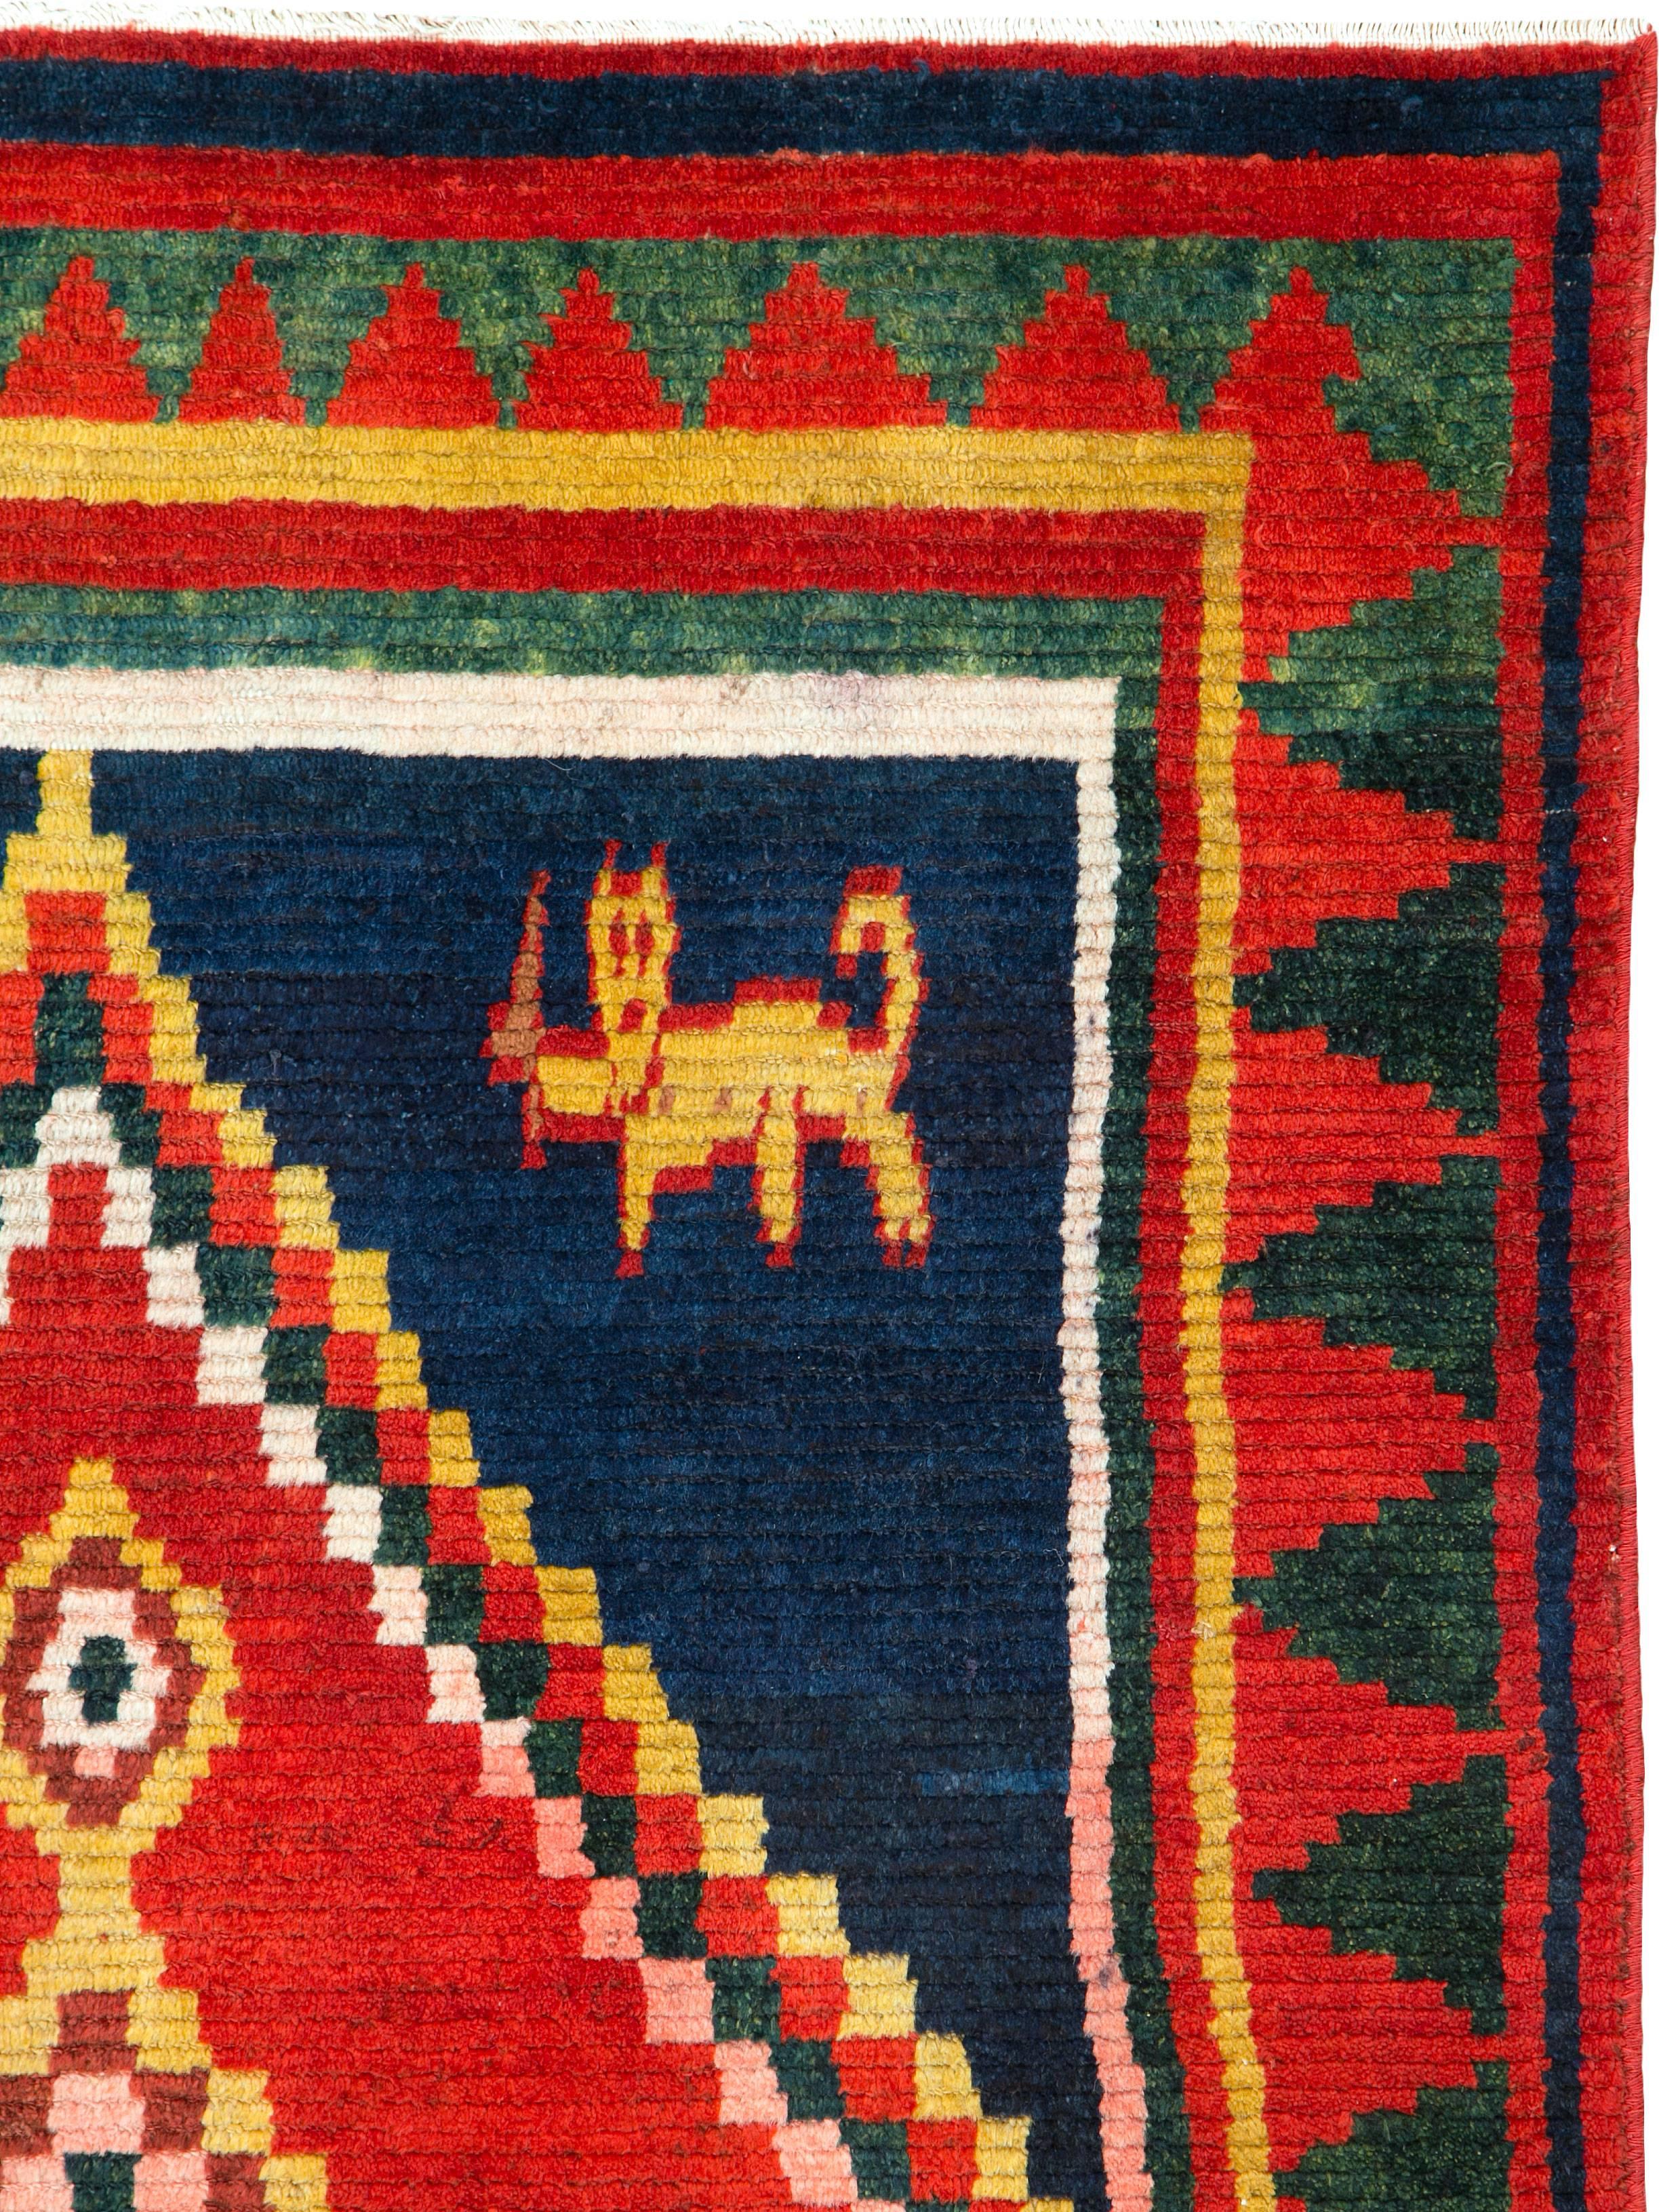 An antique Persian Gabbeh carpet from the second quarter of the 20th century.